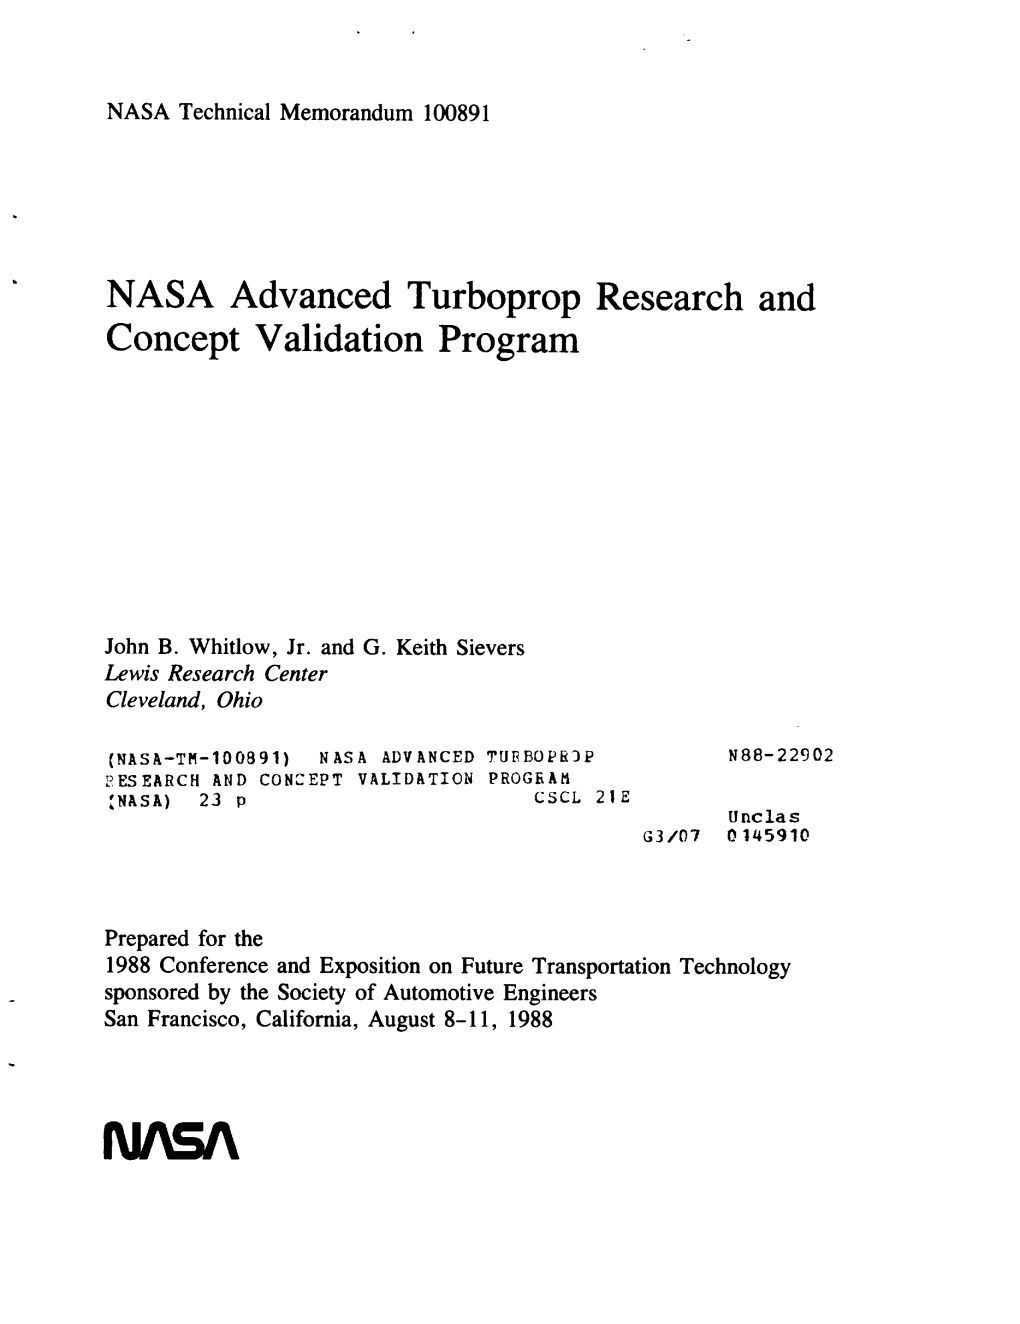 NASA Advanced Turboprop Research and Concept Validation Program